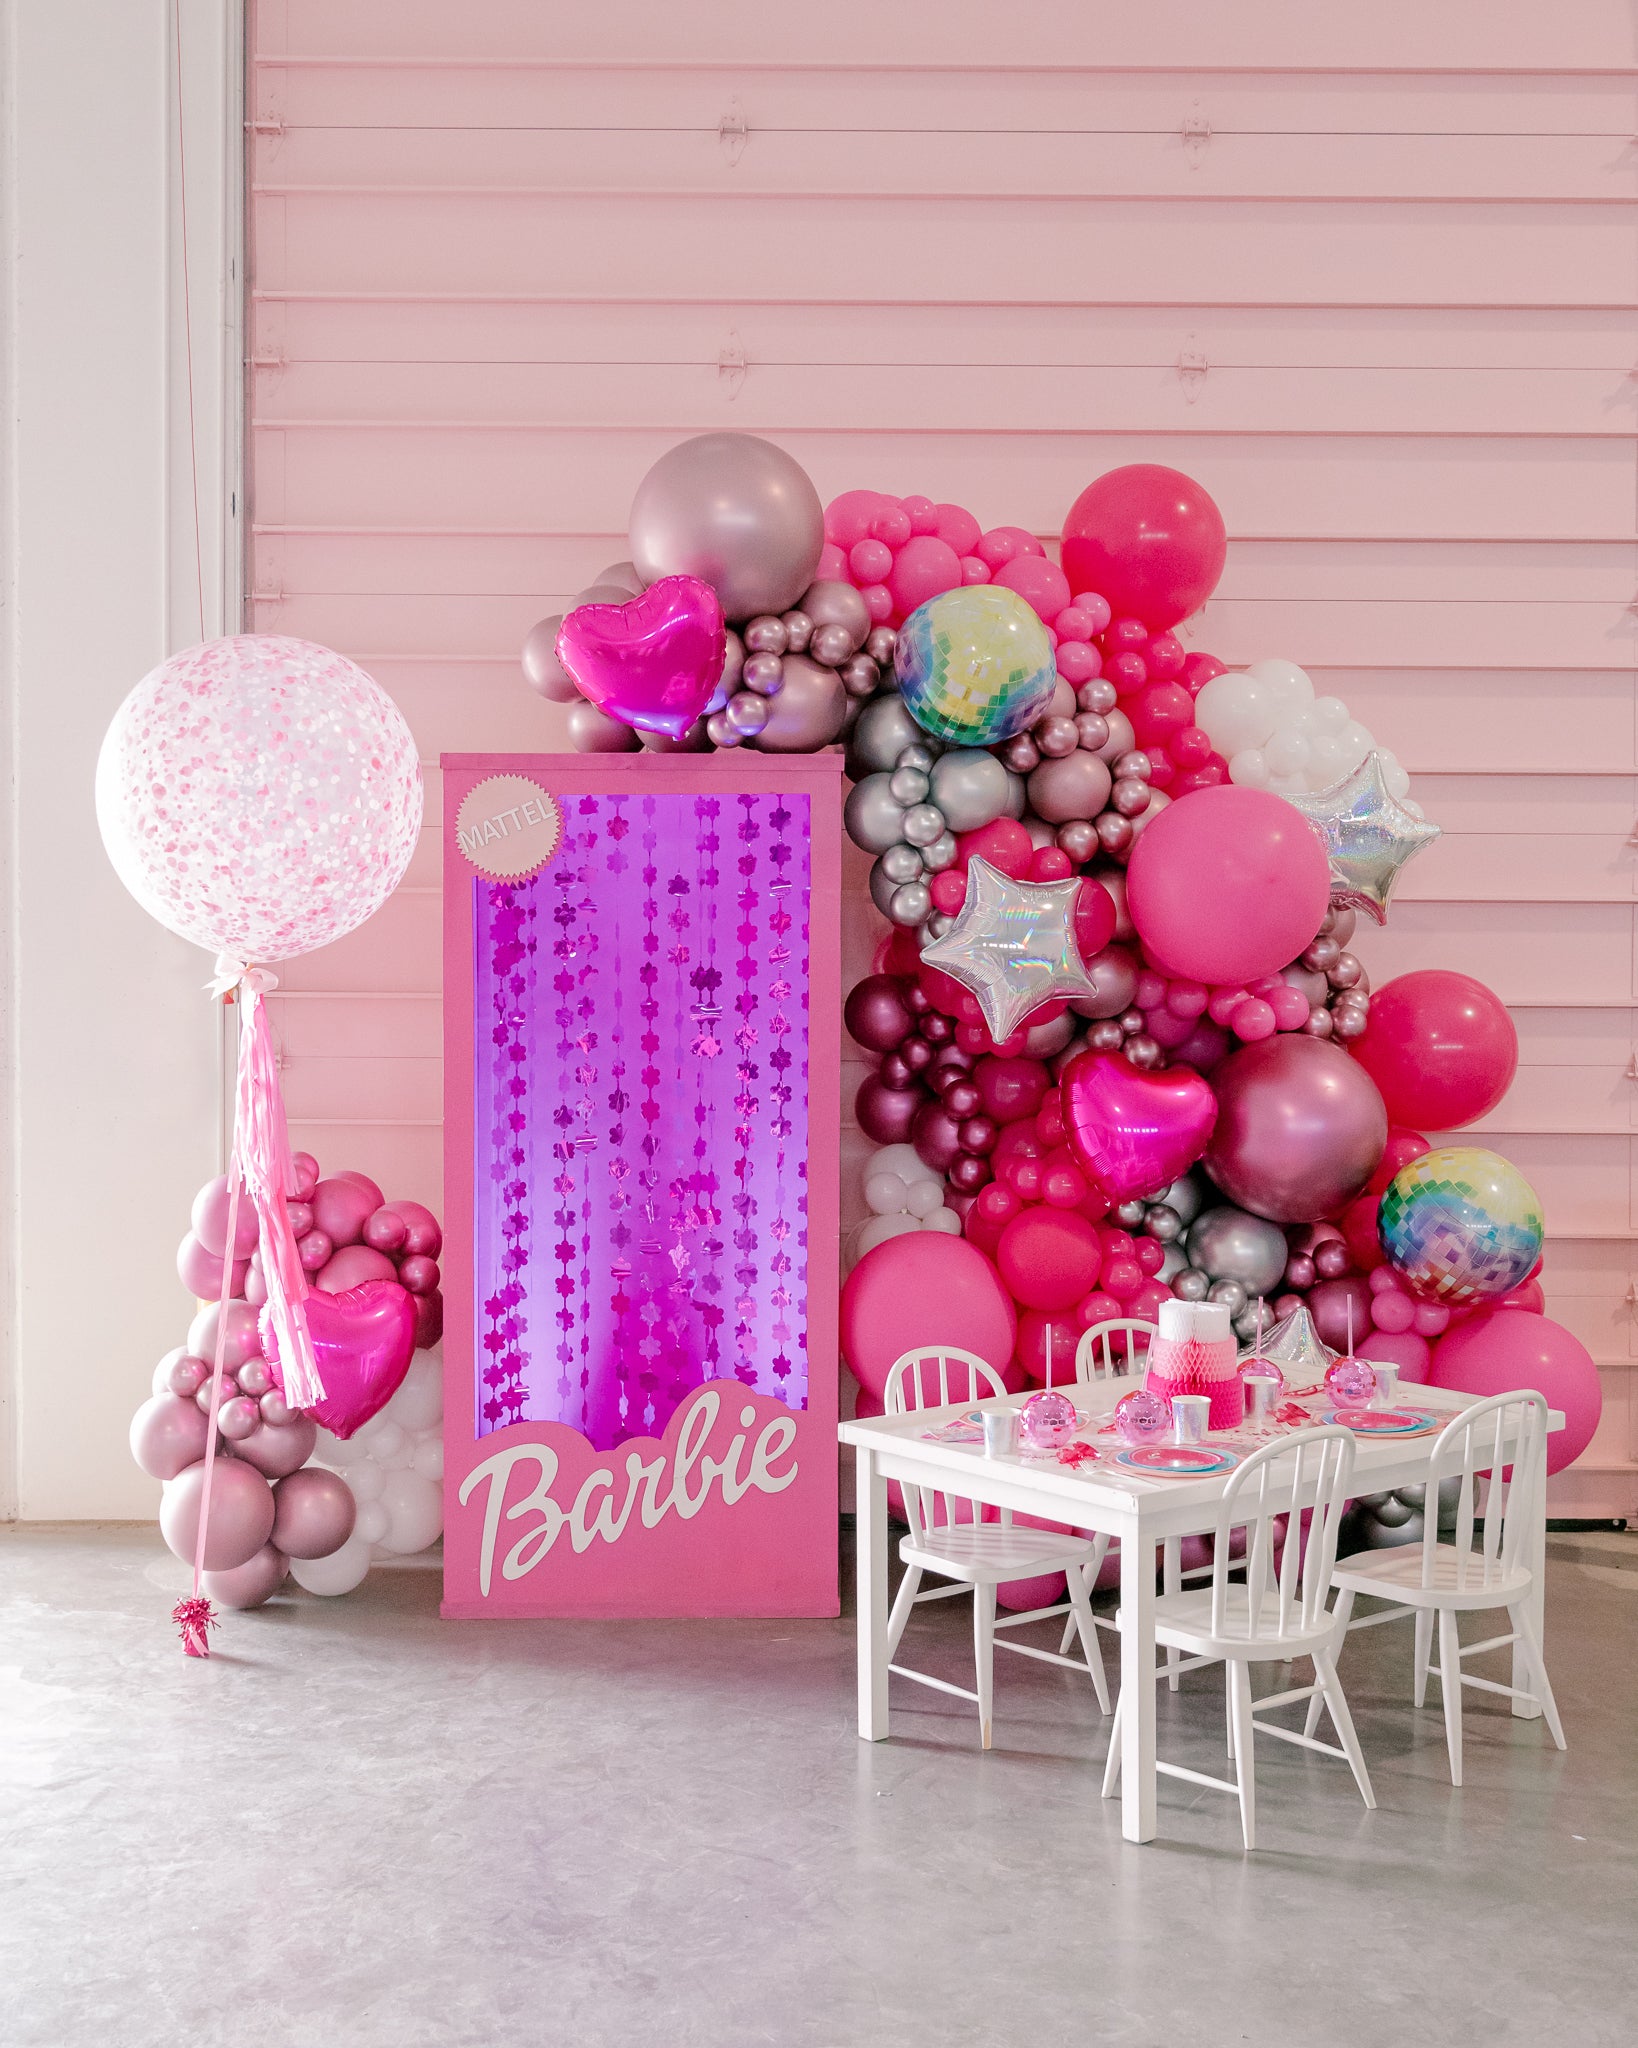 Barbie party decorations and Barbie party backdrop ideas.